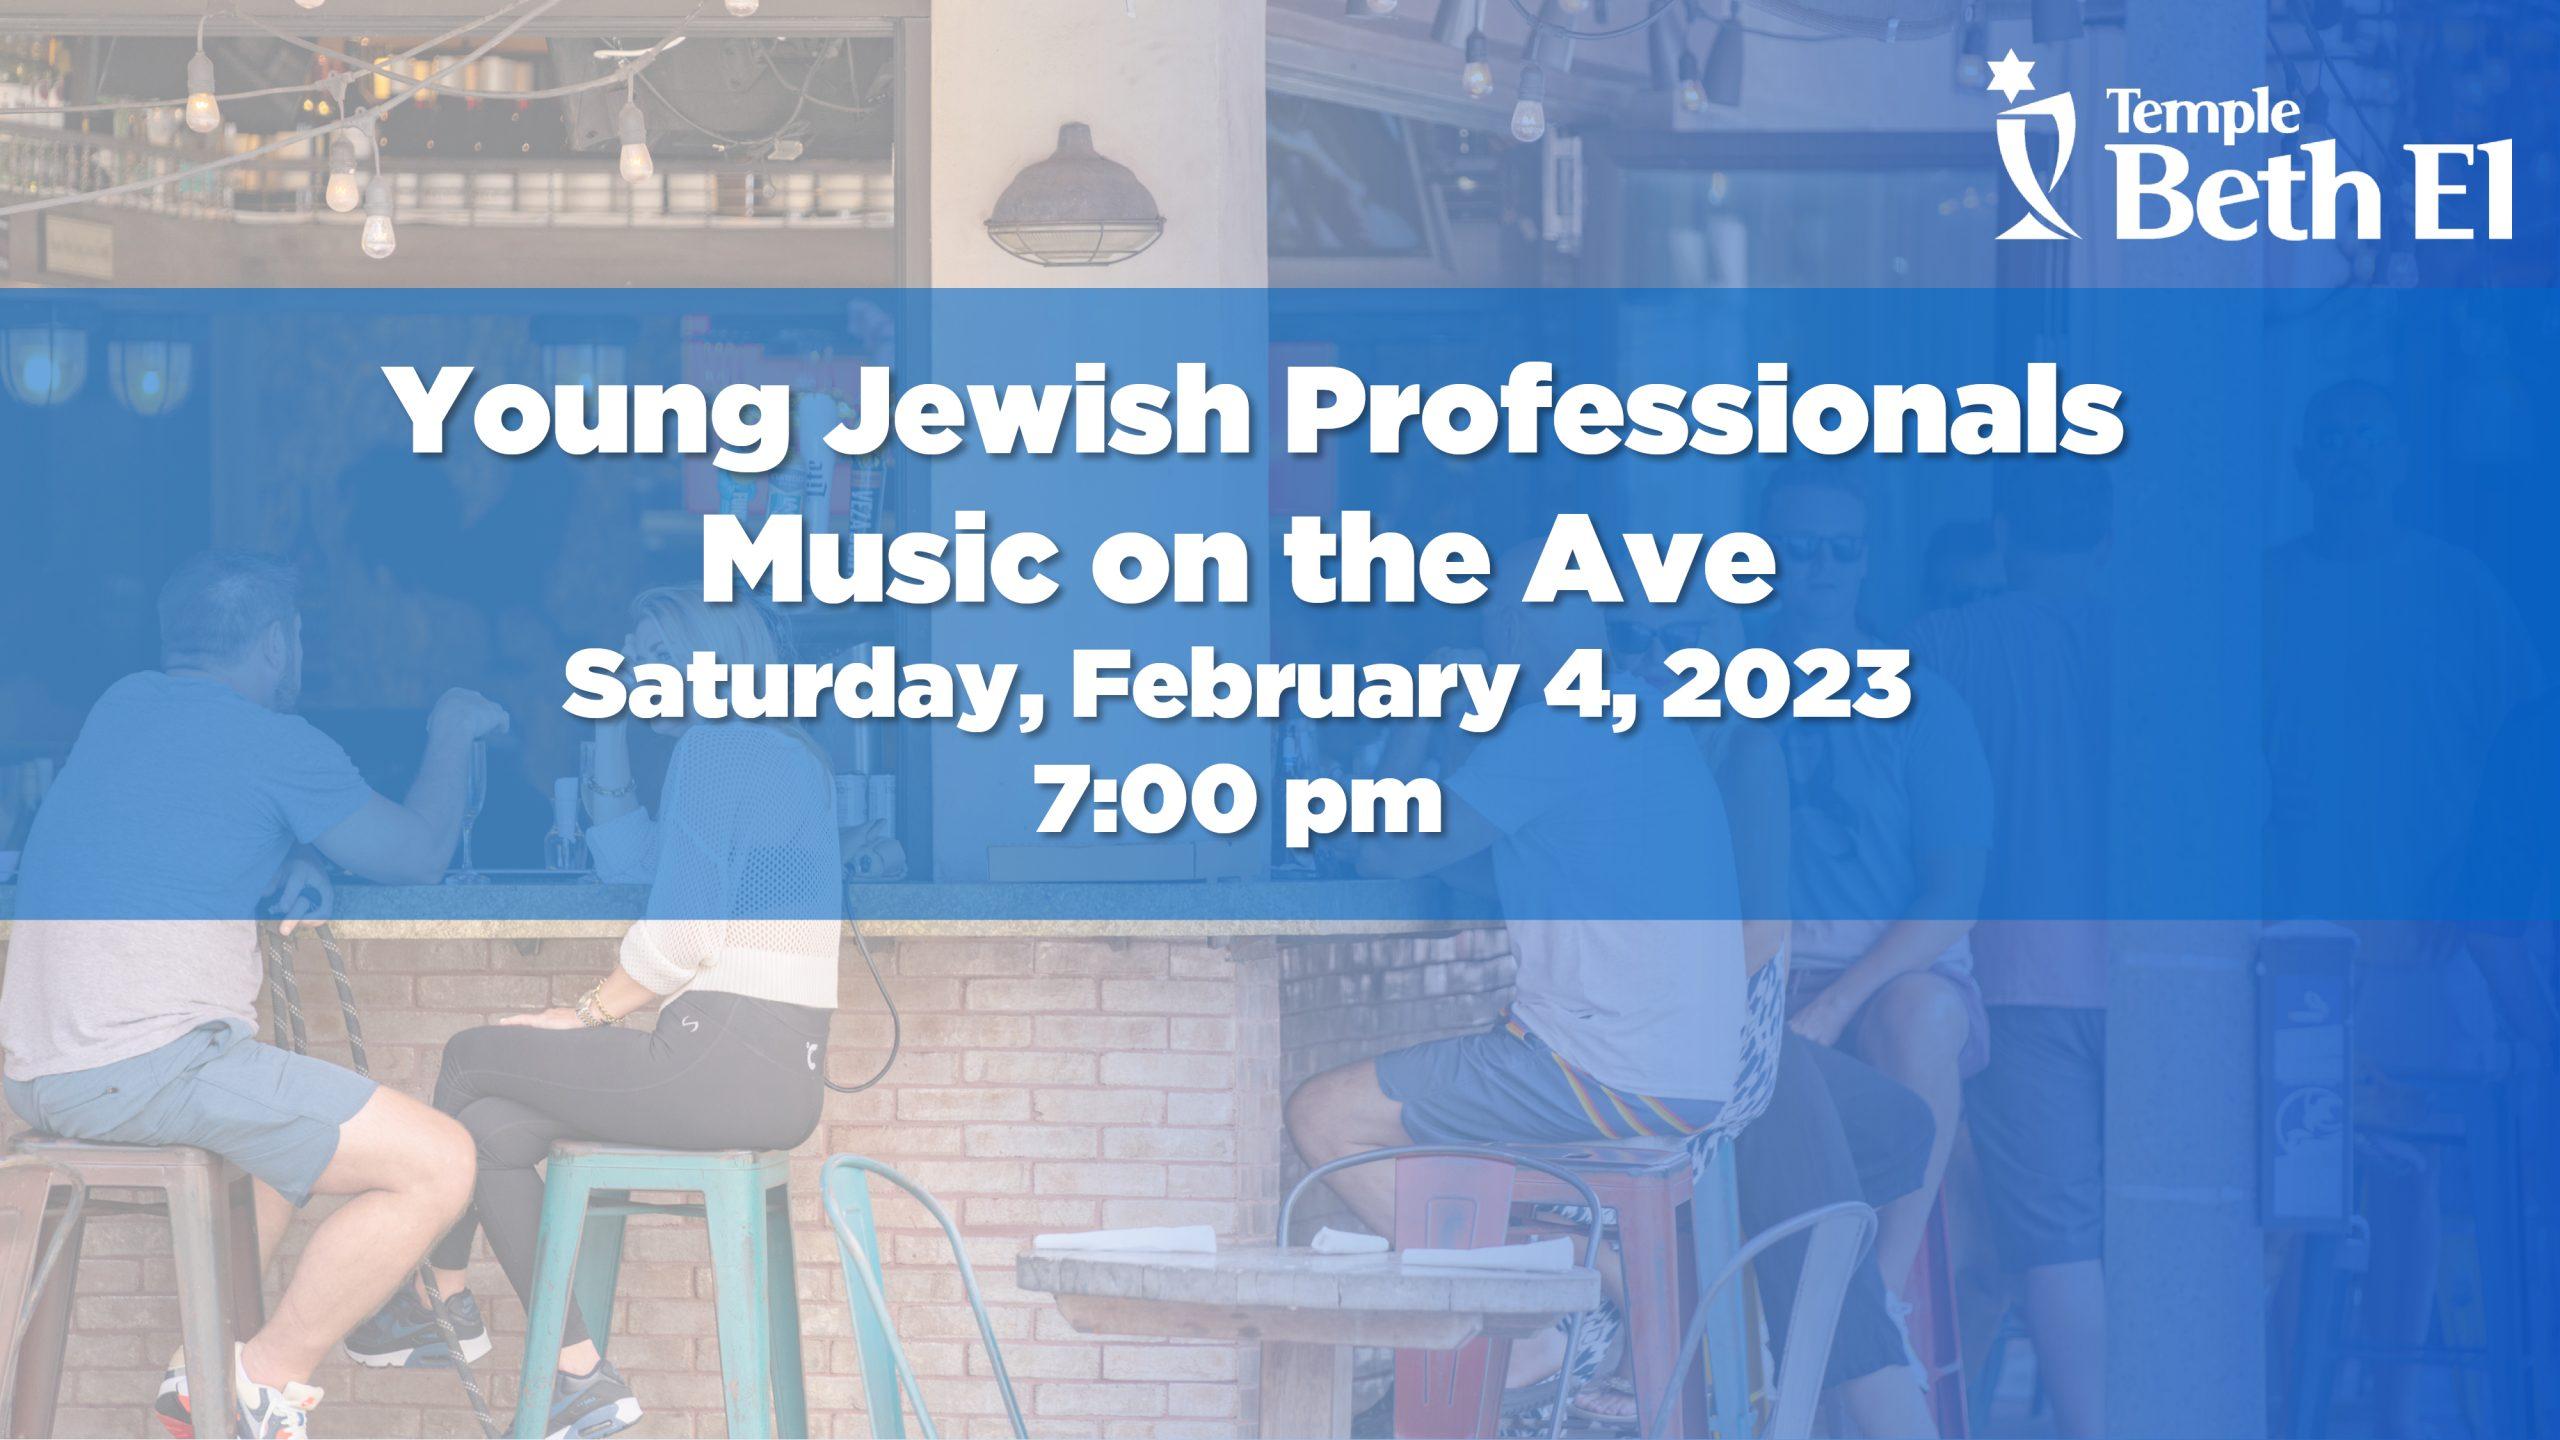 Are you a young Jewish professional in Boca Raton? Regardless of whether you grew up at Temple Beth El, or are new to the area, this community is for you! We aim to create meaningful opportunities that will expand your network, connect you to Judaism, and be fun for all.